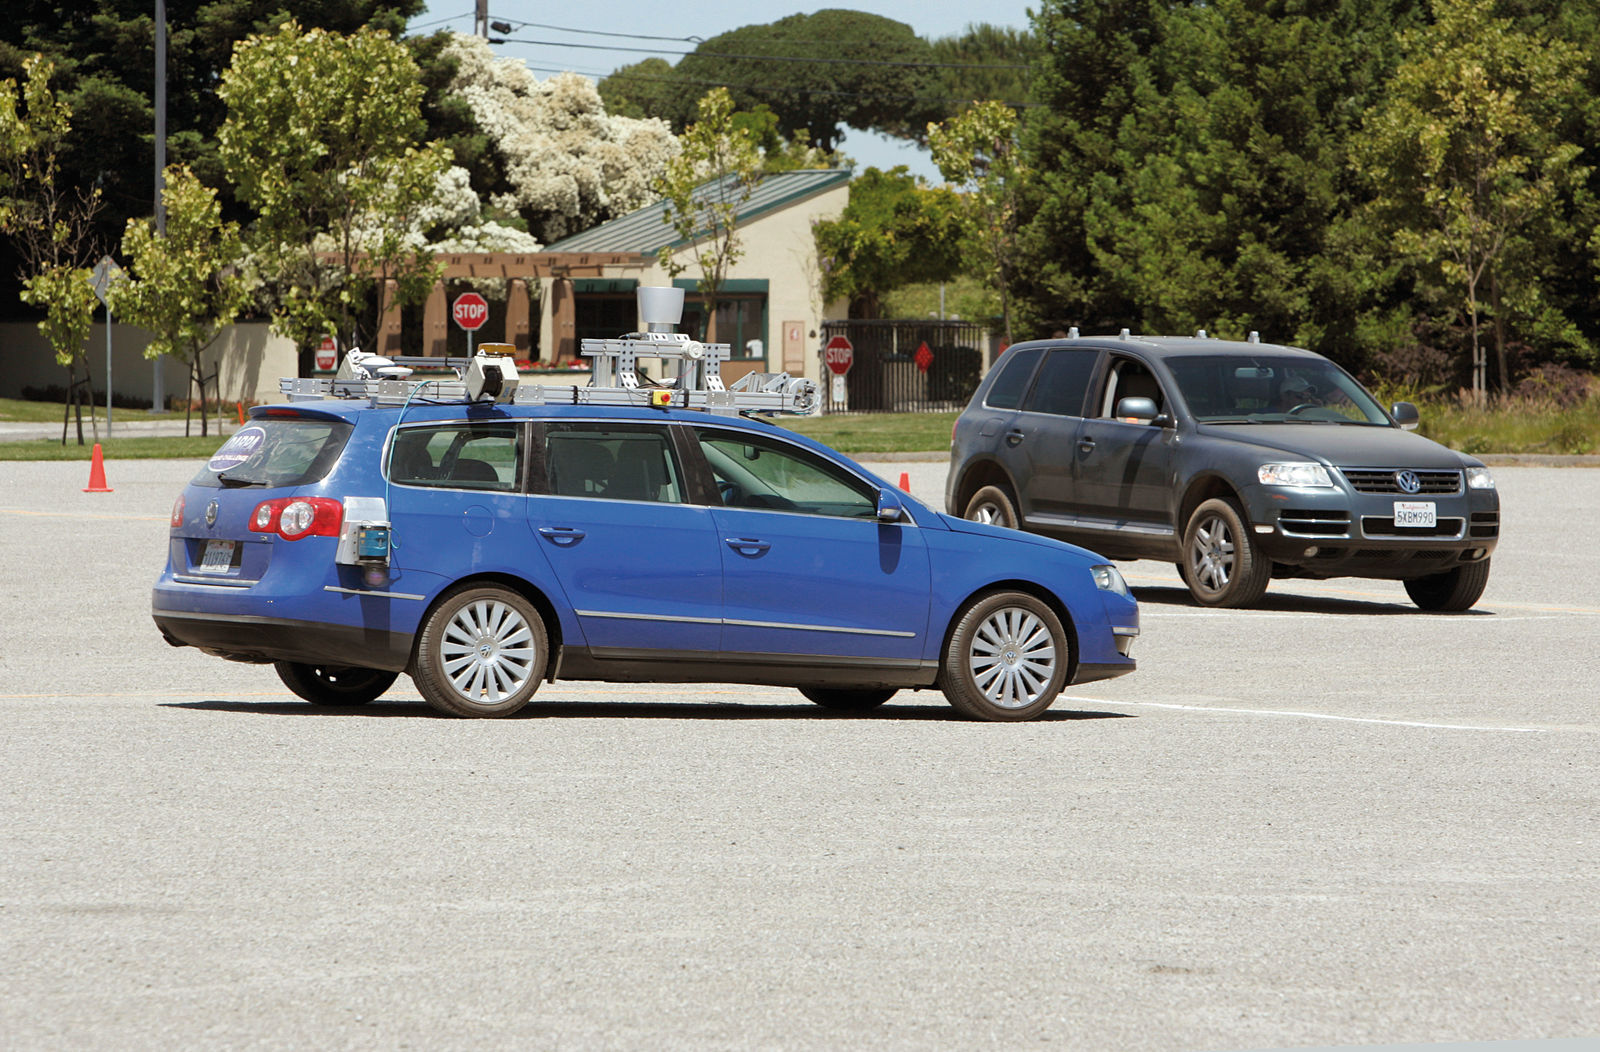 2007 DARPA Urban Challenge in the US, Passat Variant and Touareg